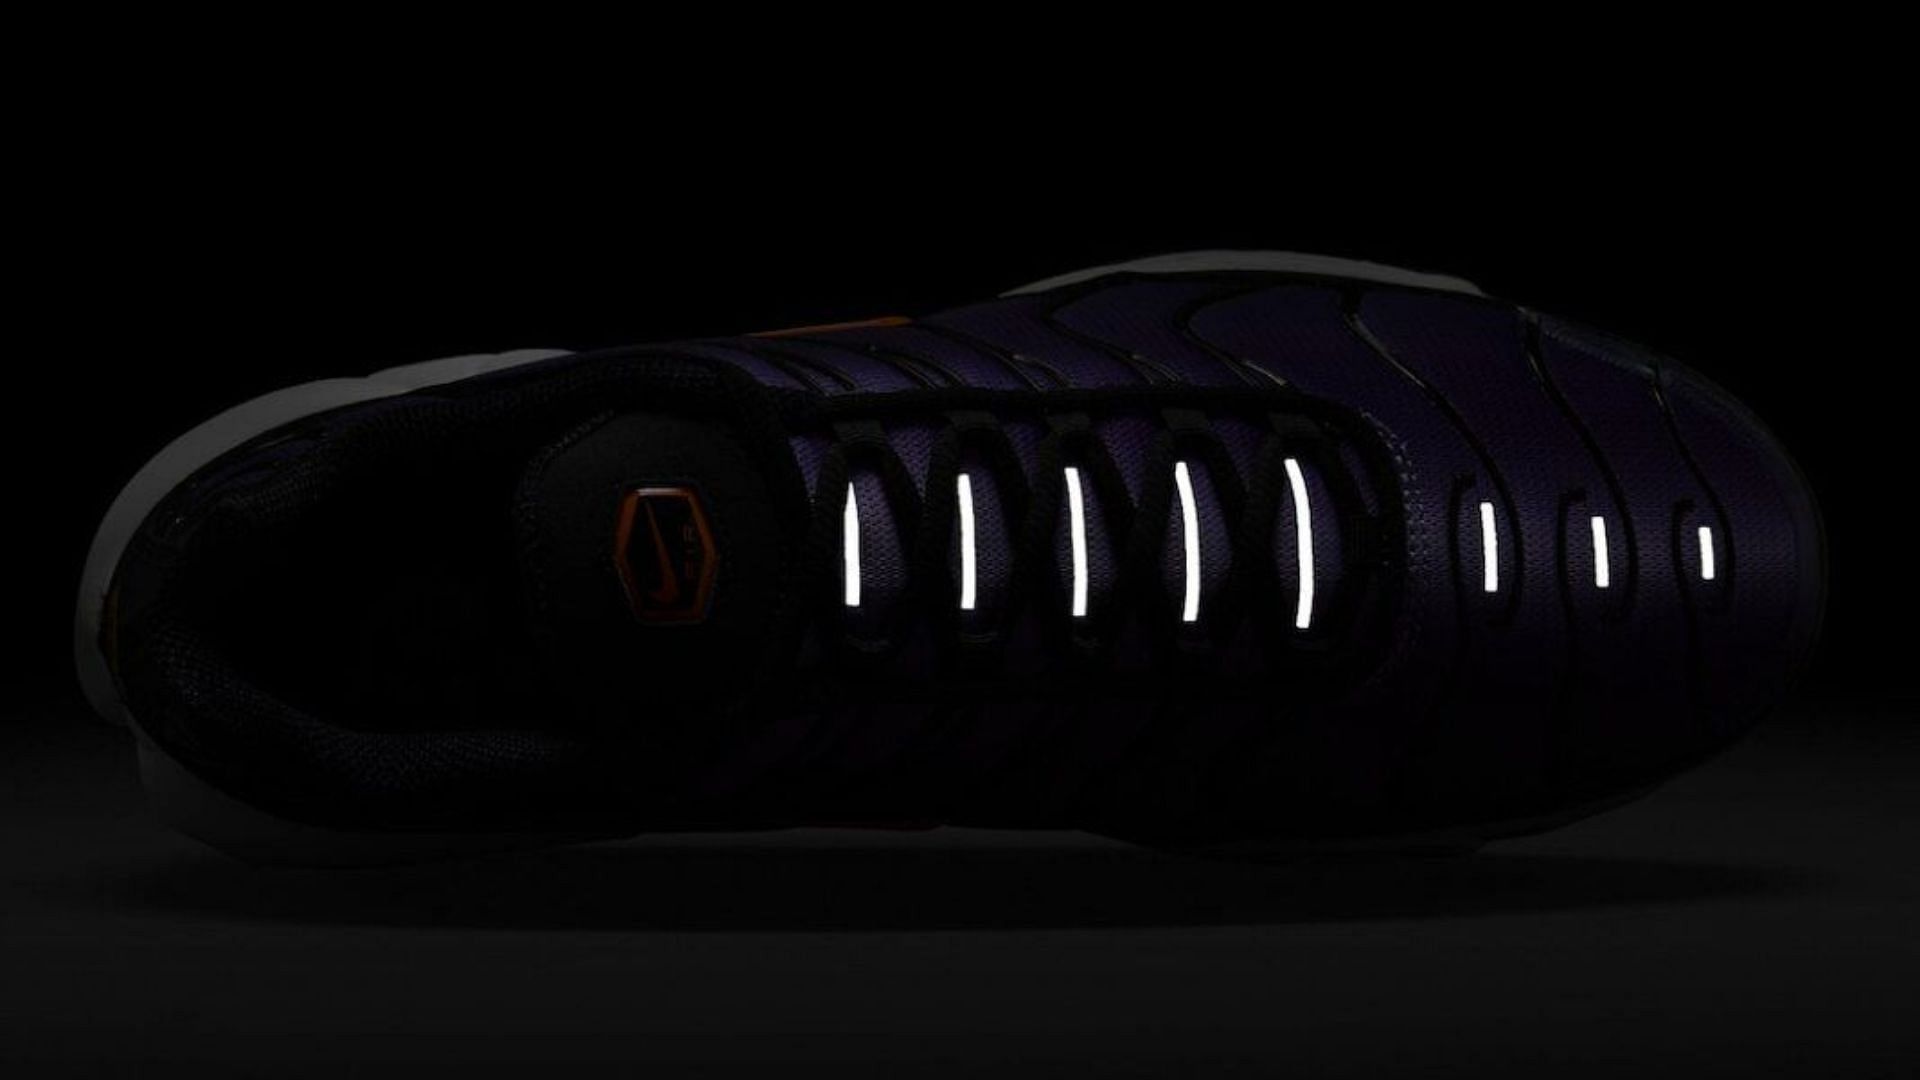 The glow-in-the-dark accents make the shoe more appealing (Image via Nike)